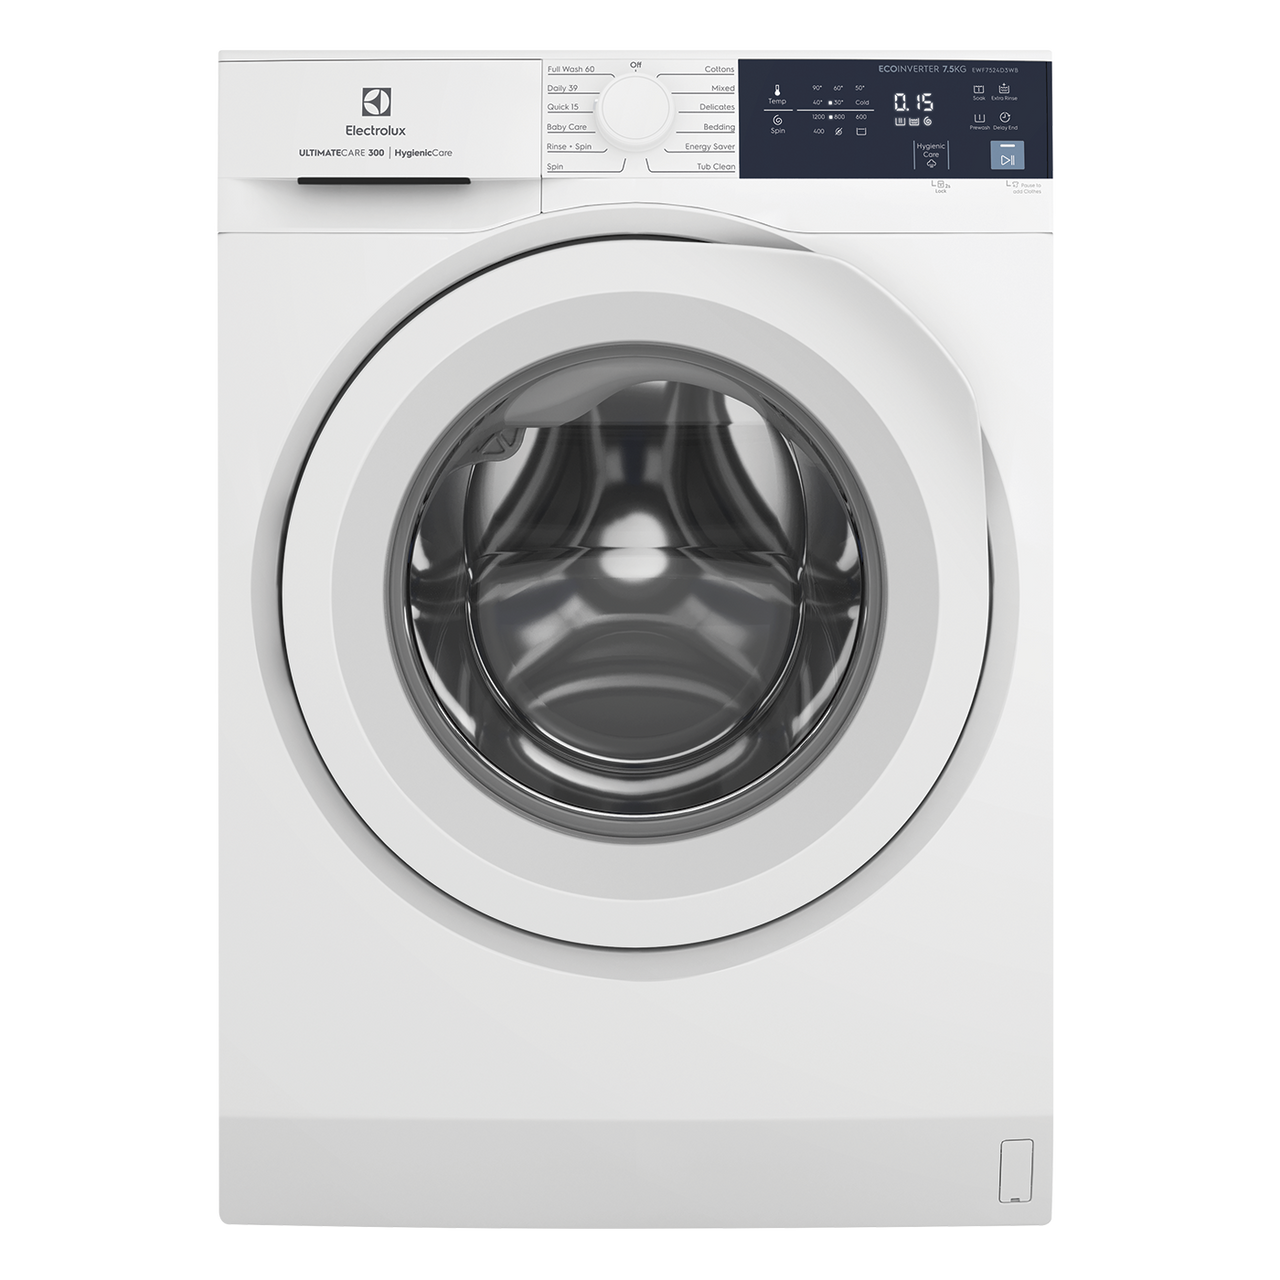 EWF7524D3WB - 7.5kg Front Load washer - White